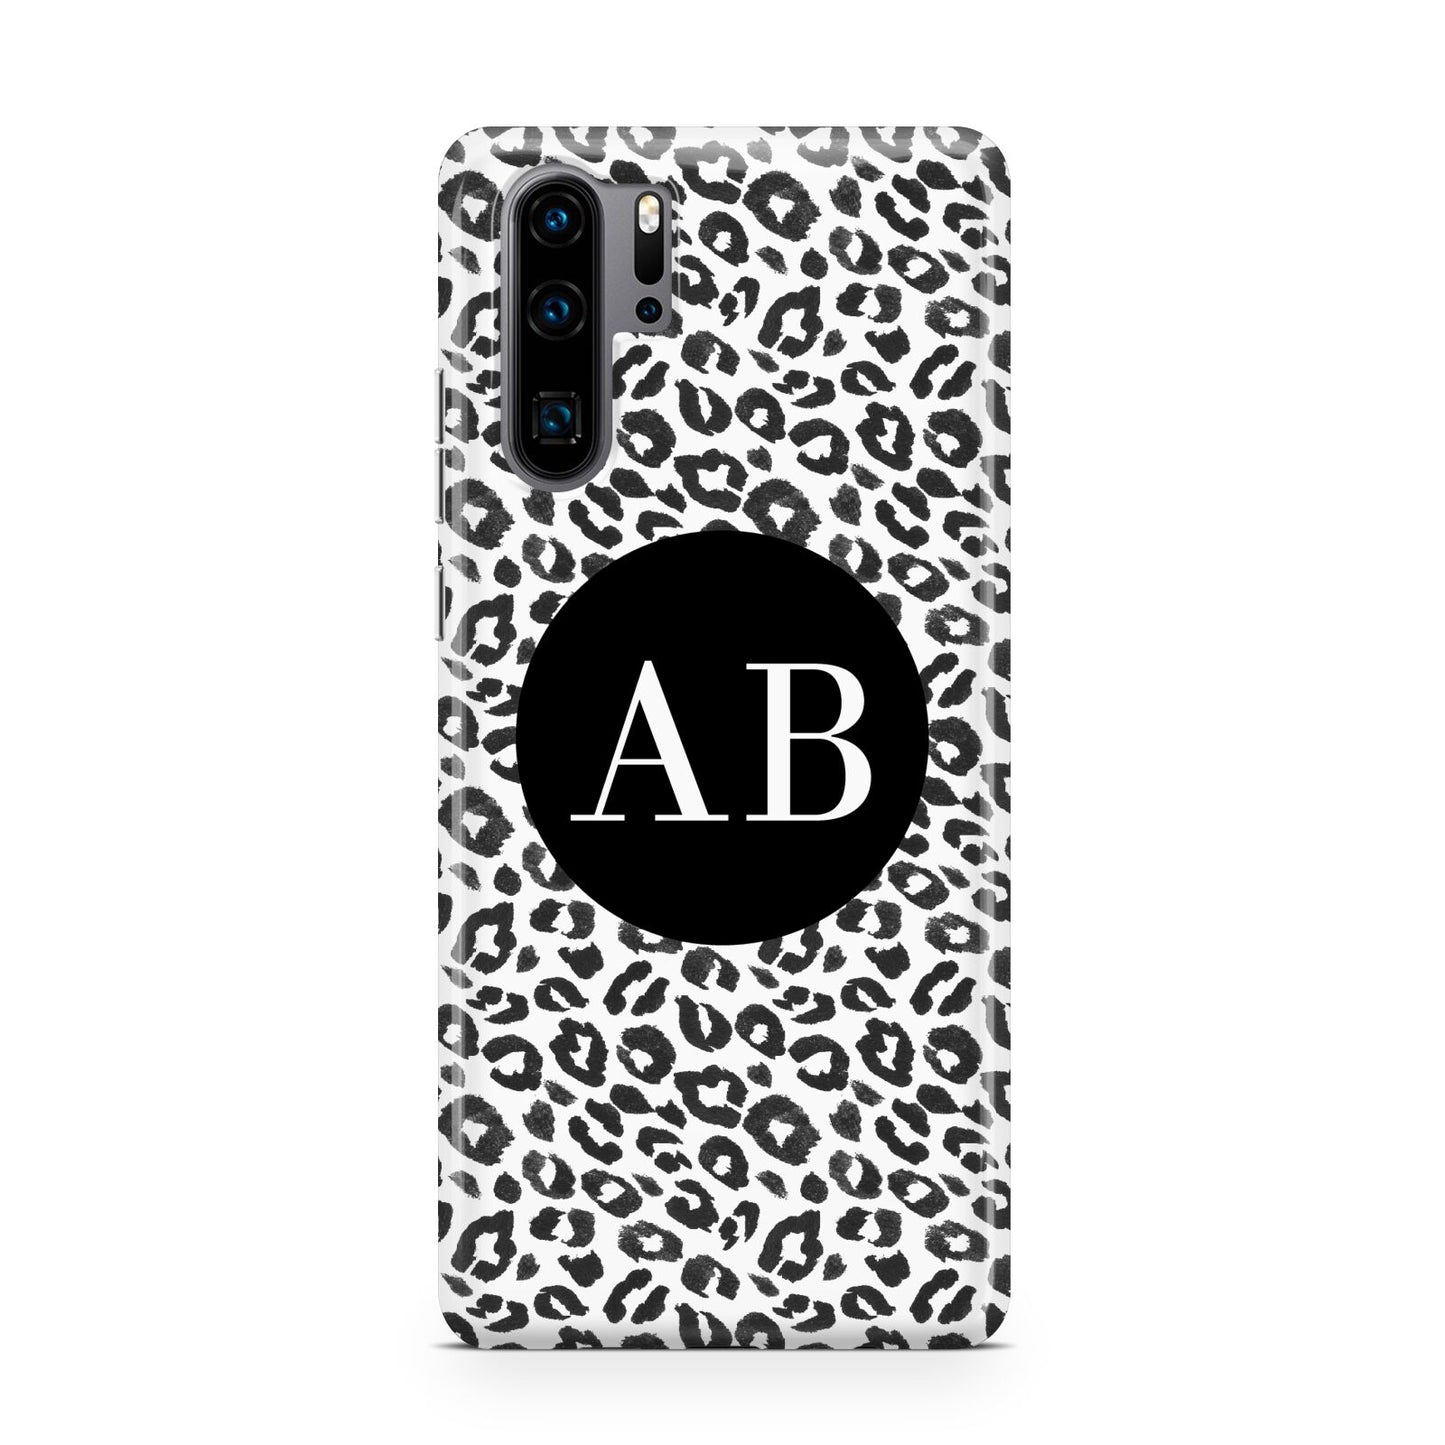 Leopard Print Black and White Huawei P30 Pro Phone Case